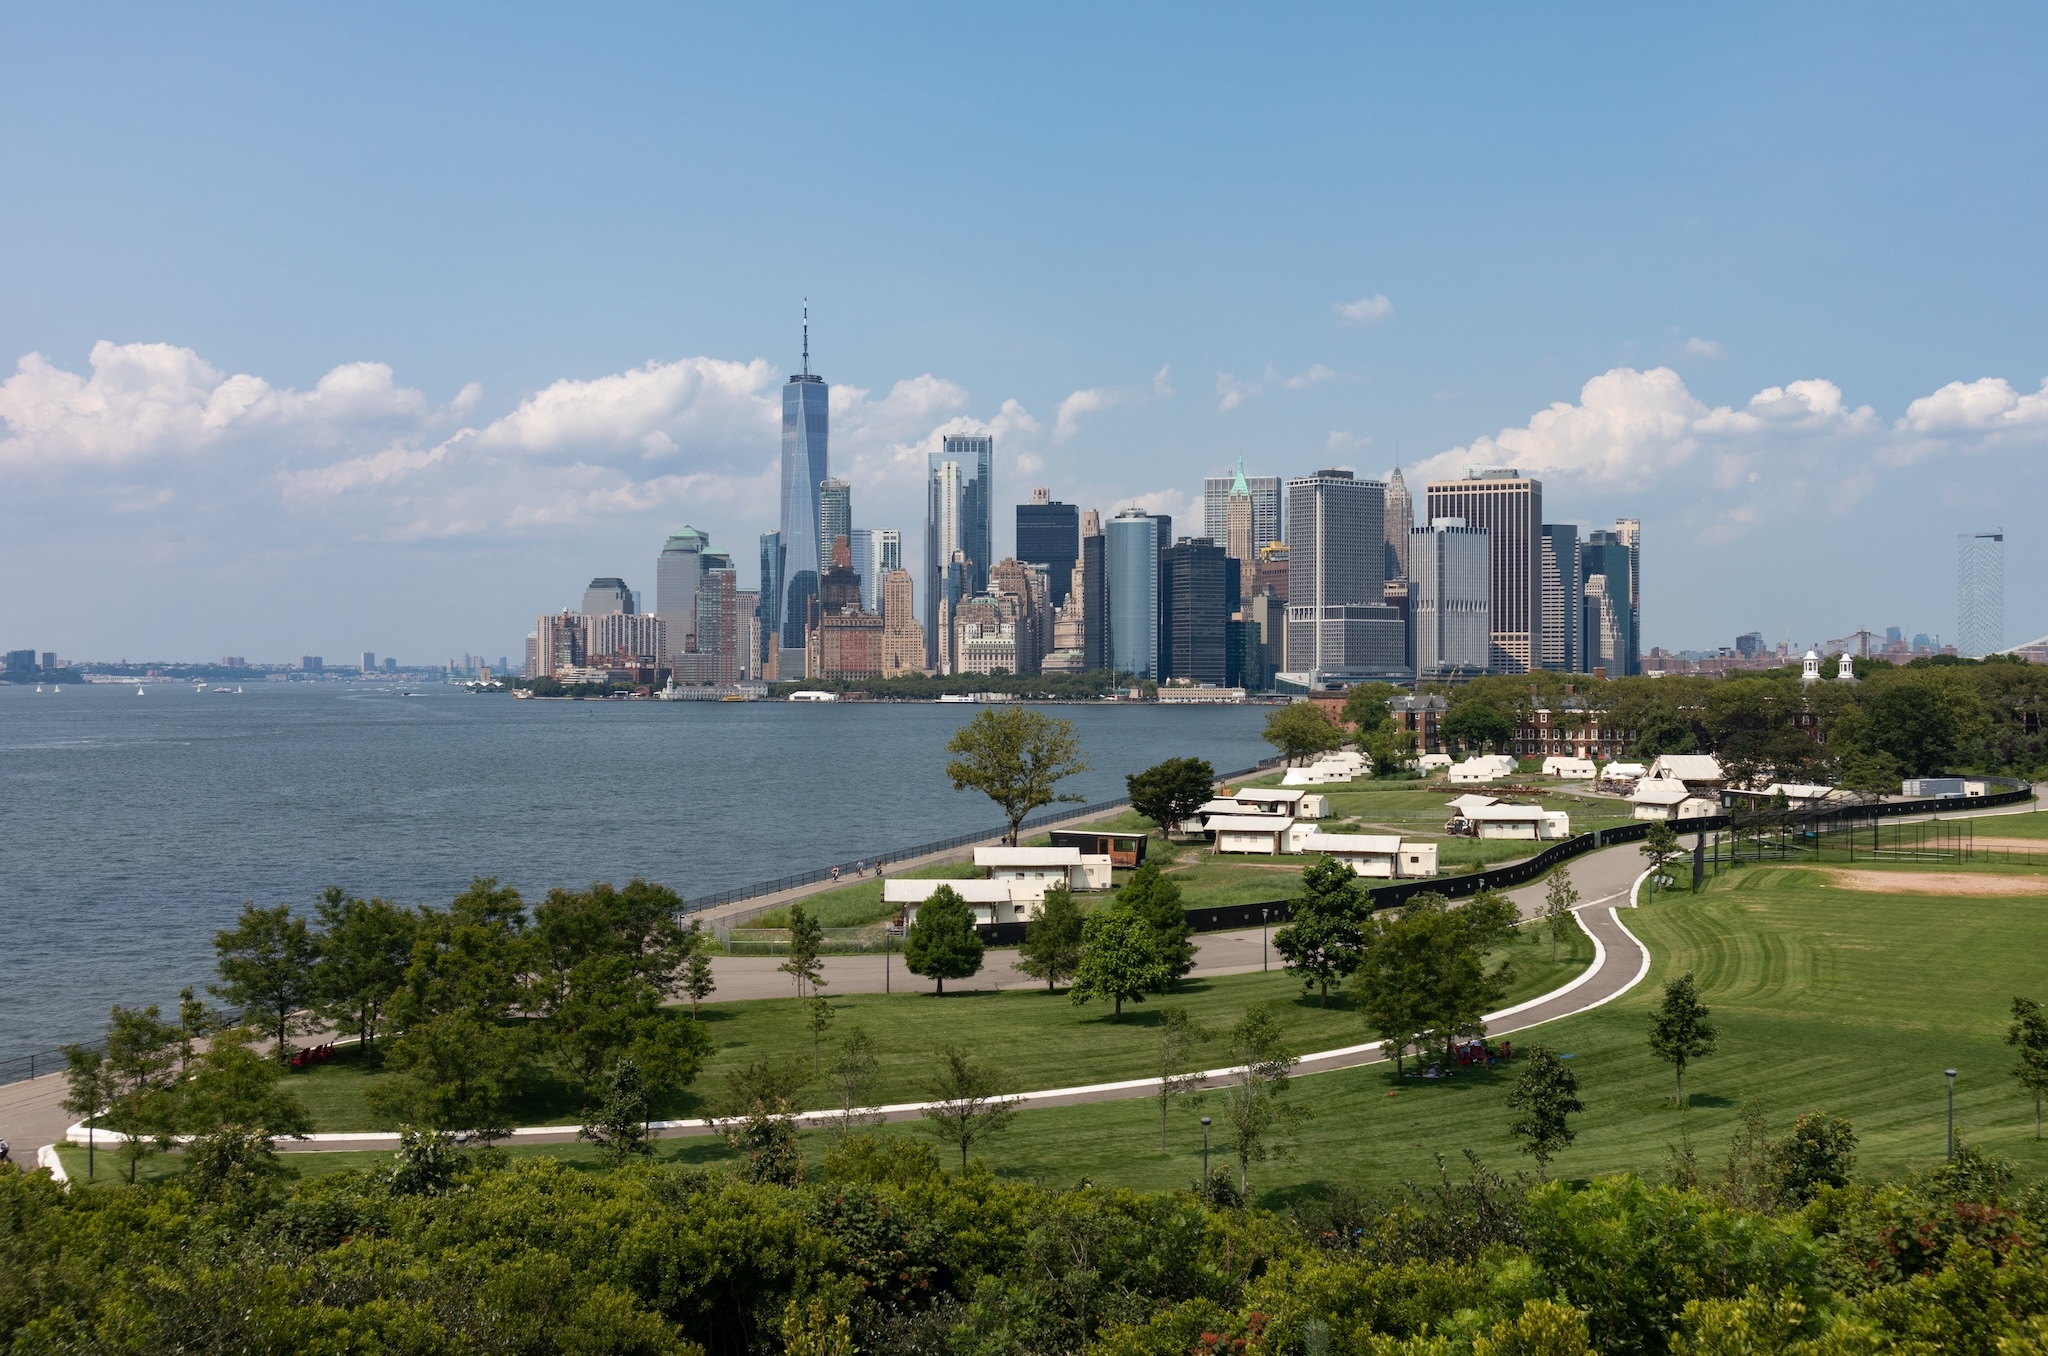 Here are all the free shows and programs taking place on Governors Island this summer